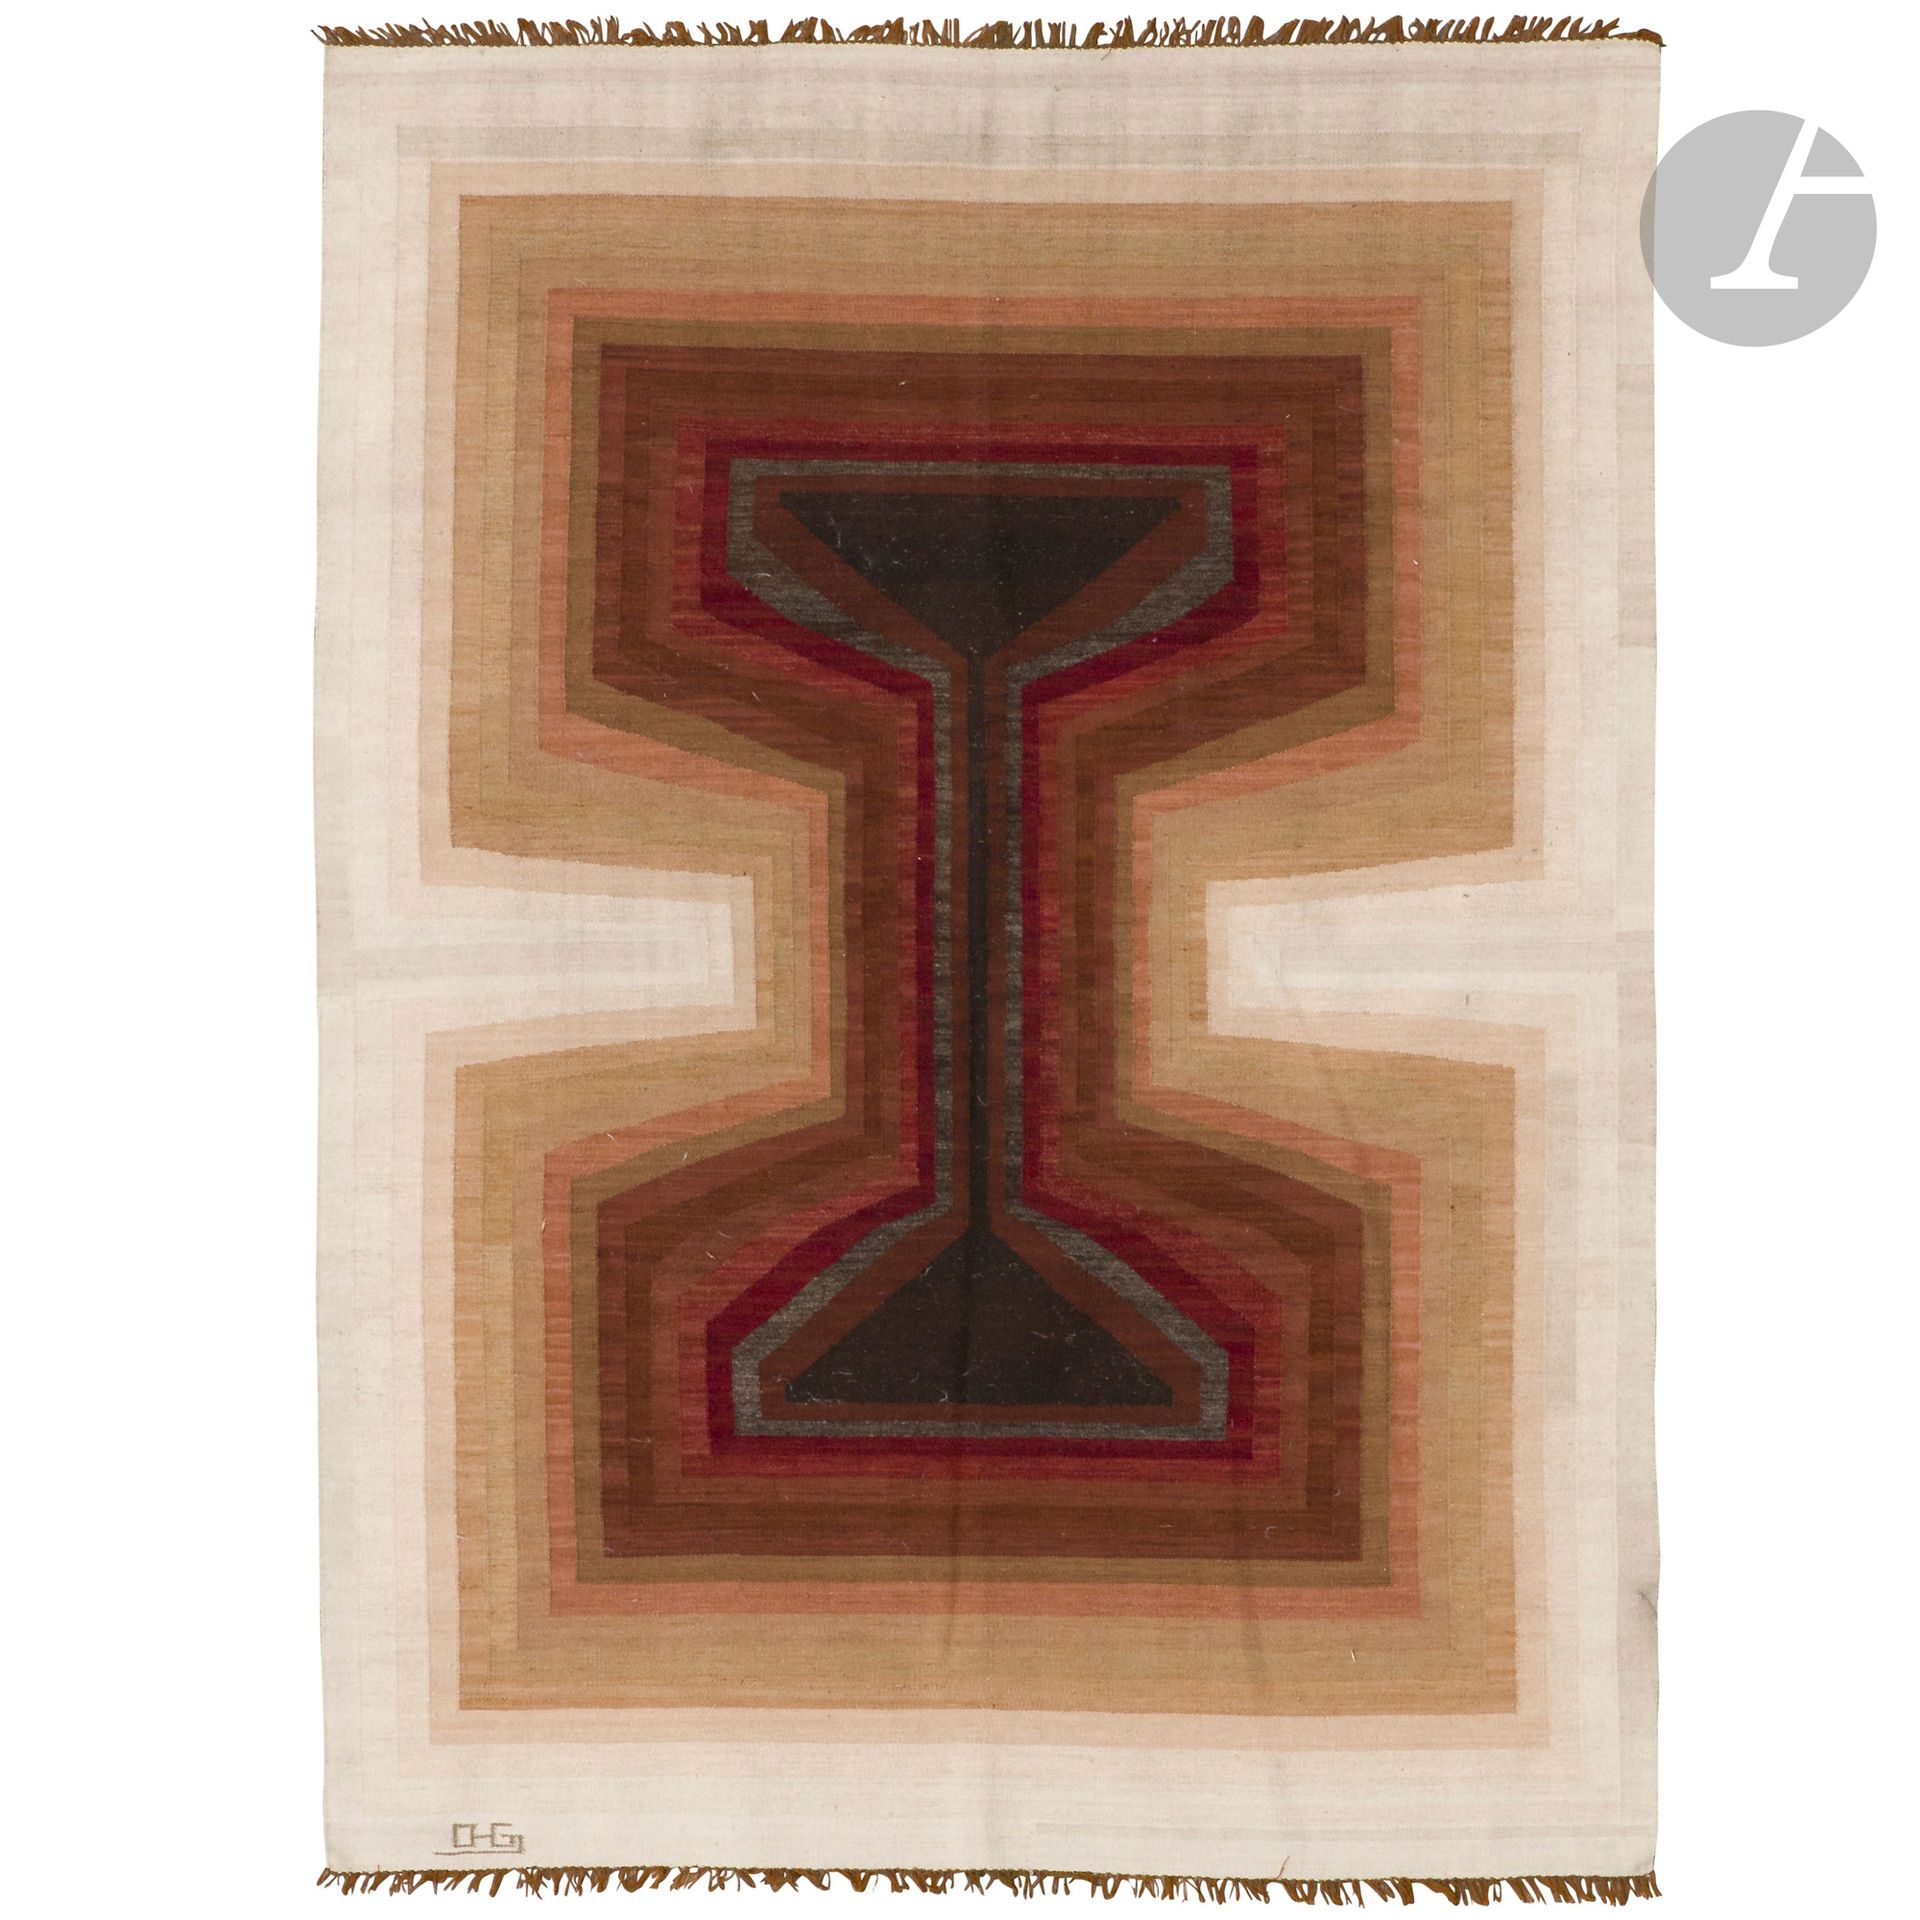 Null 20th CENTURY PERUVIAN COLECLE Untitled
Tapestry. Colored wools. Monogrammed&hellip;